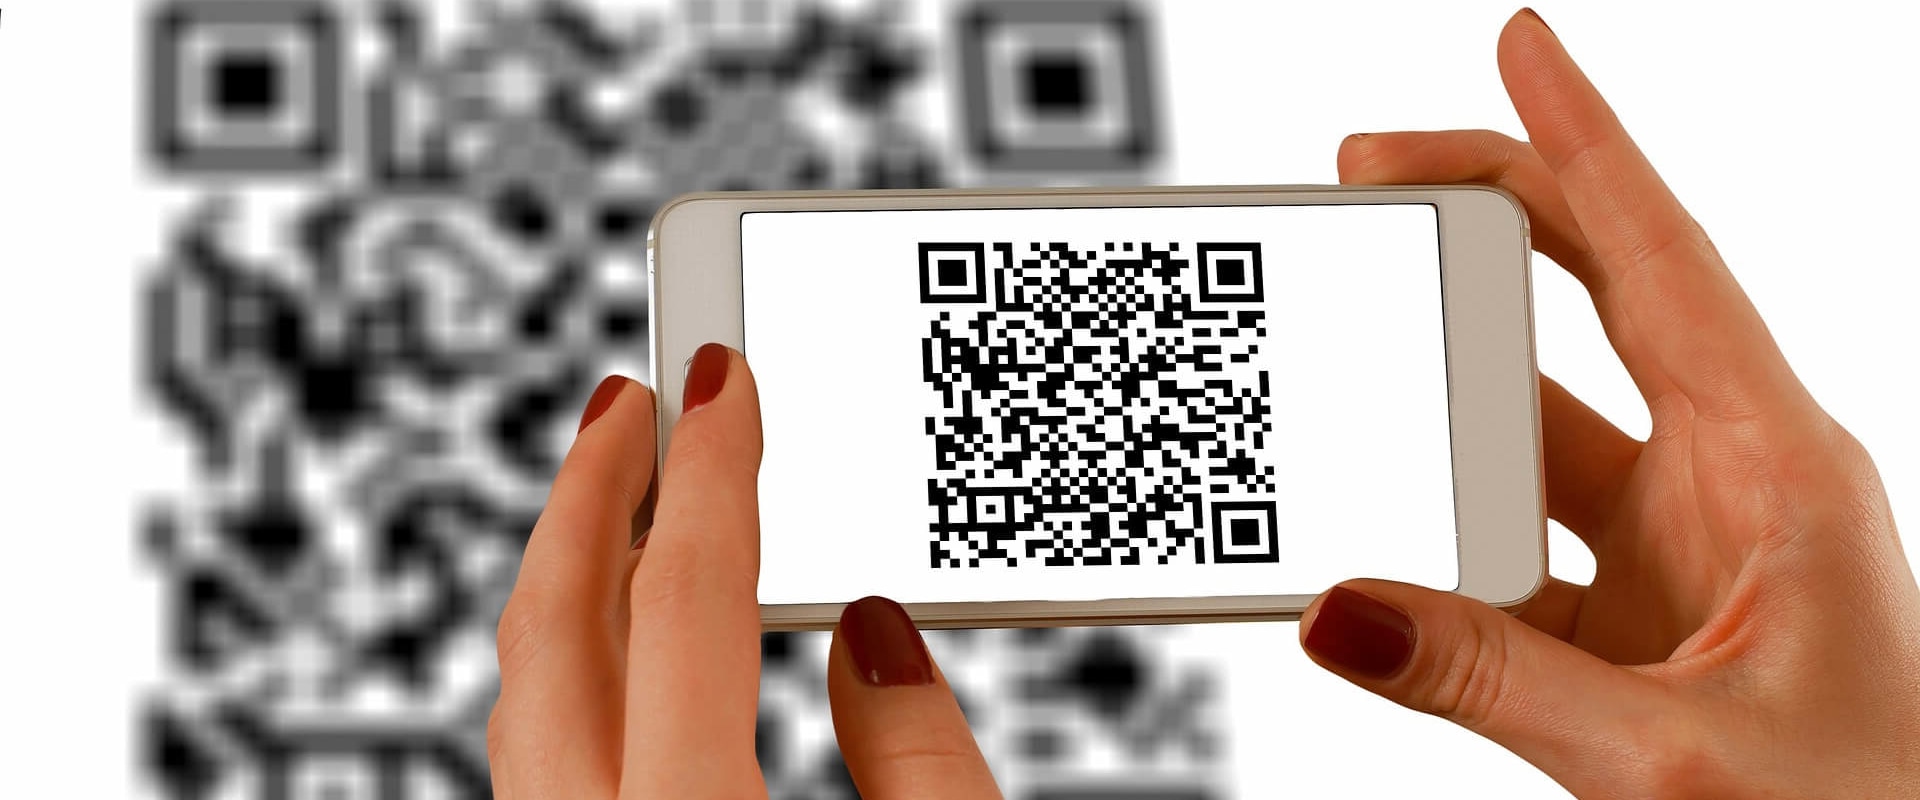 IOS QR Code Scanning Features Overview